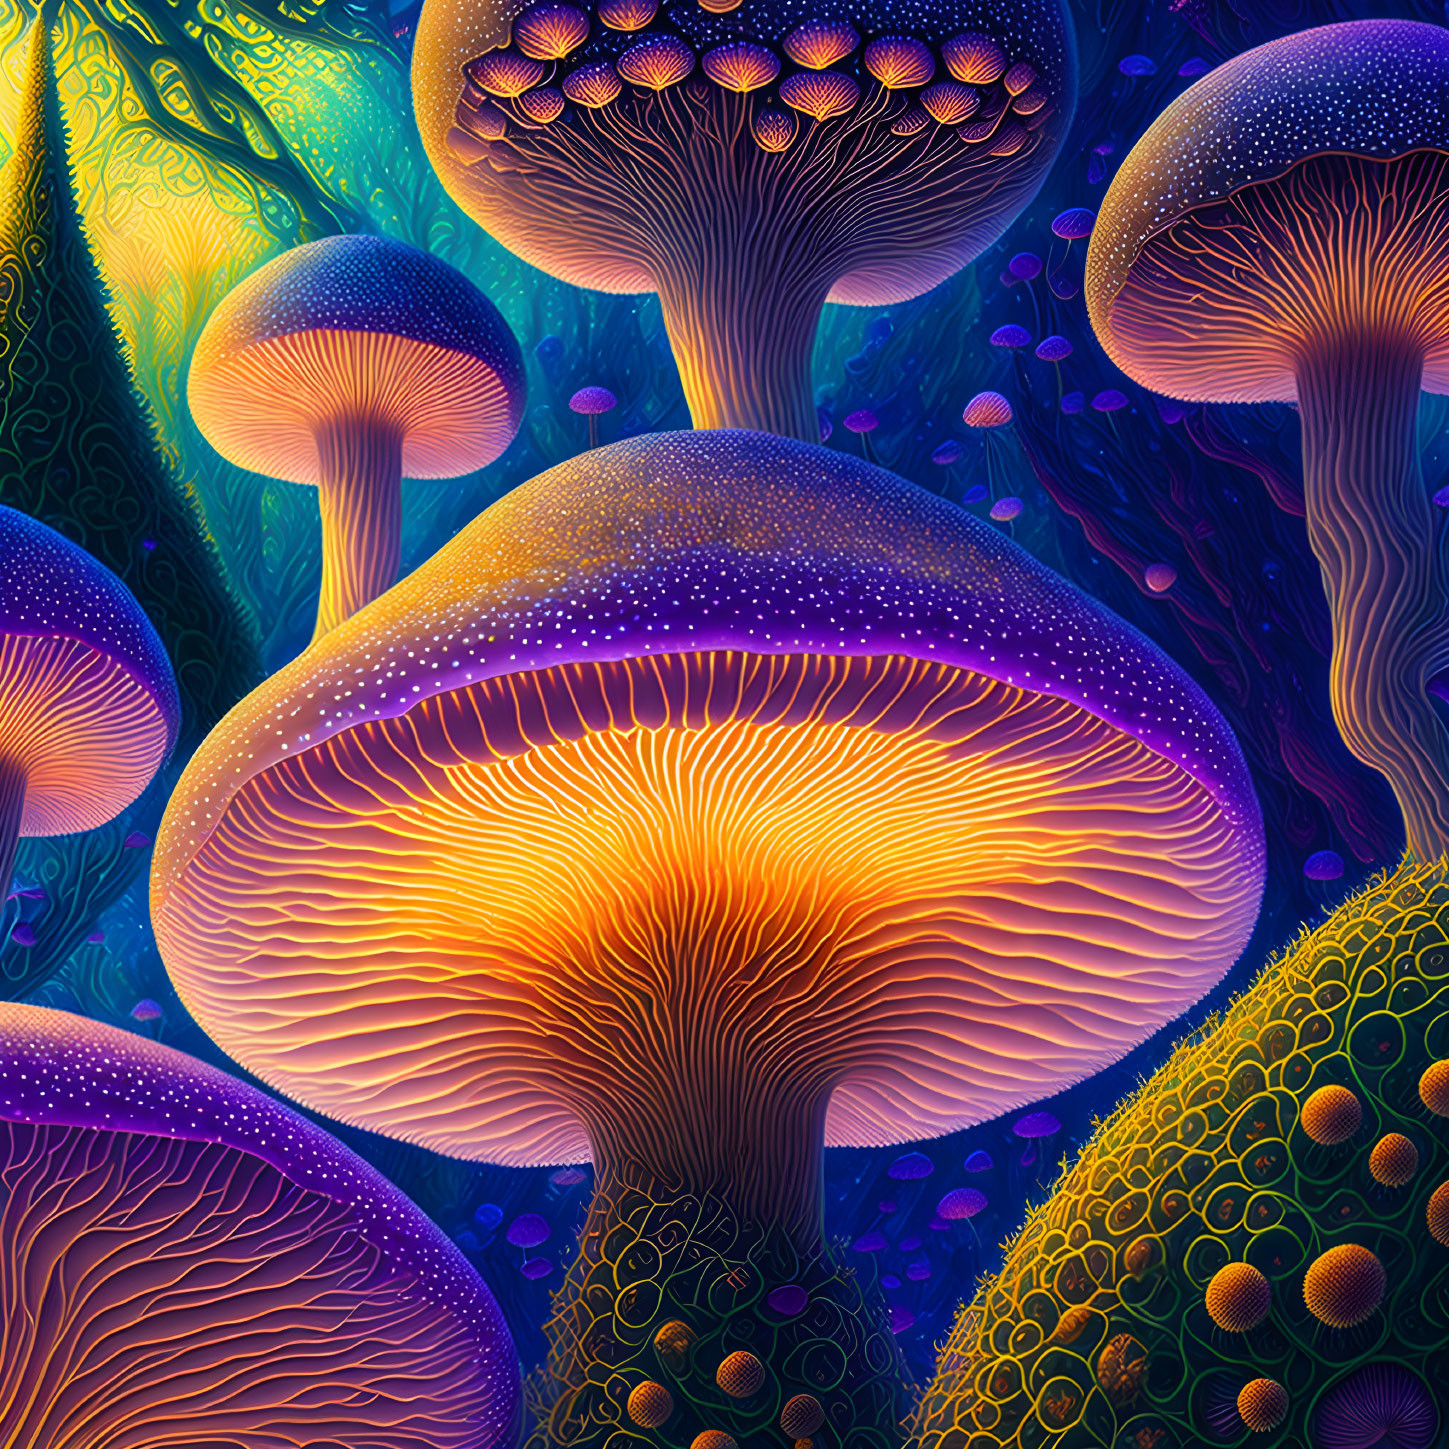 Colorful illustration: Luminescent mushrooms with glowing gills in a fantastical forest.